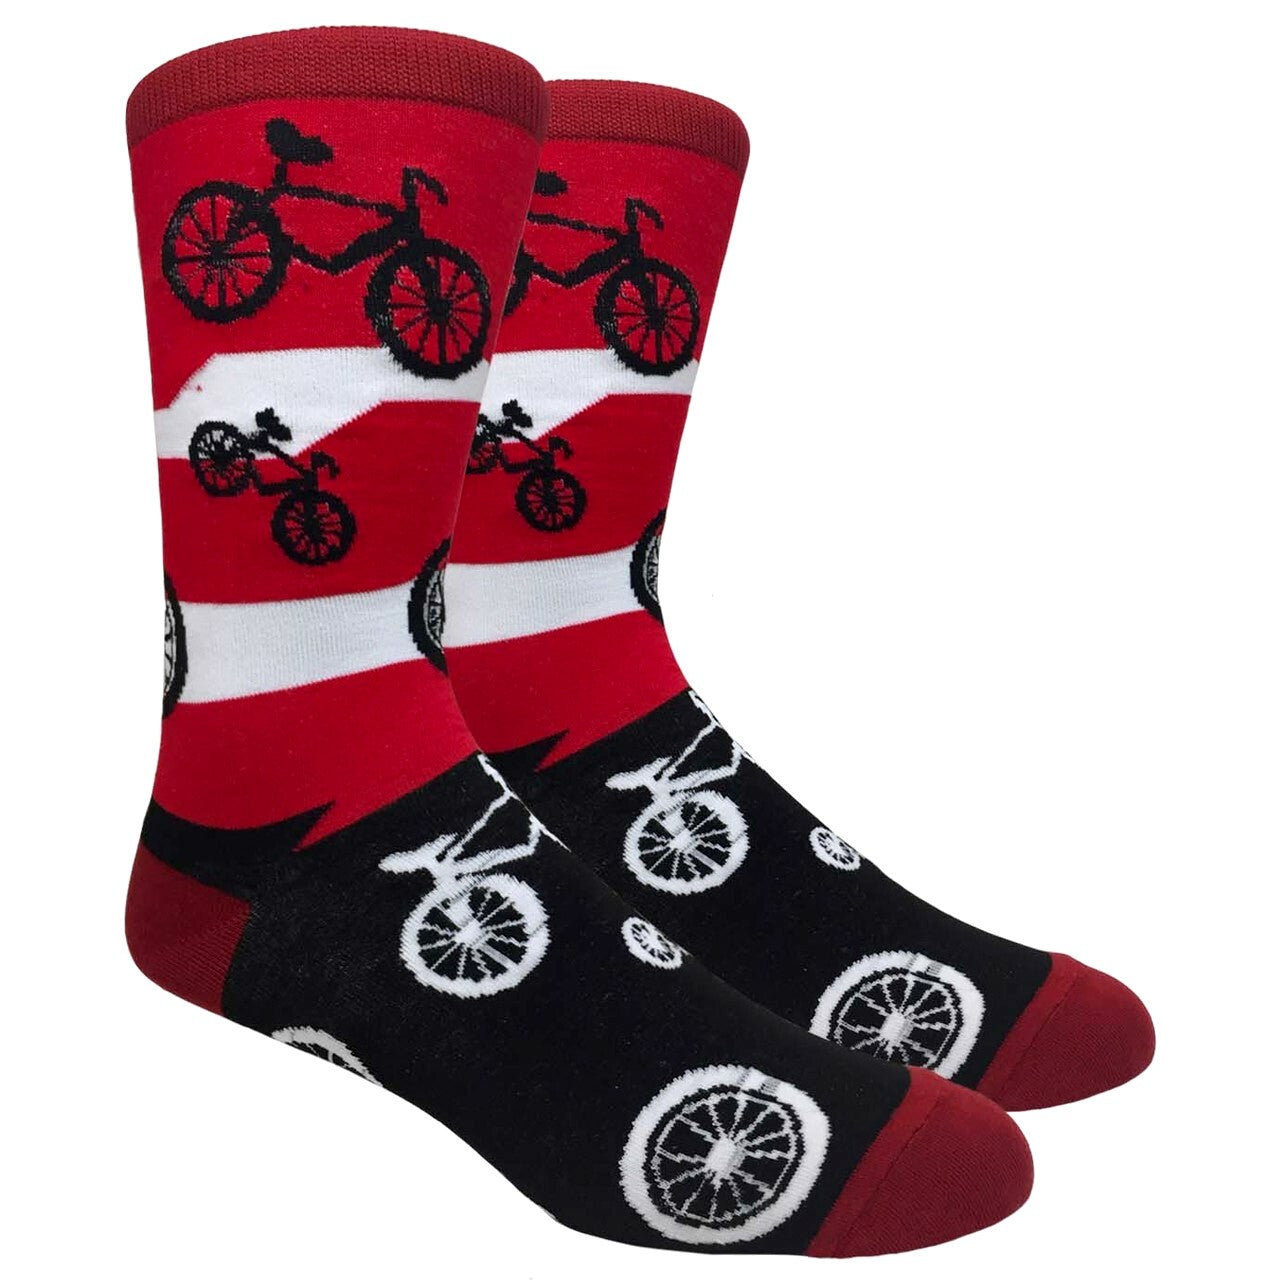 Bicycle Pattern Socks from the Sock Panda (Adult Large)